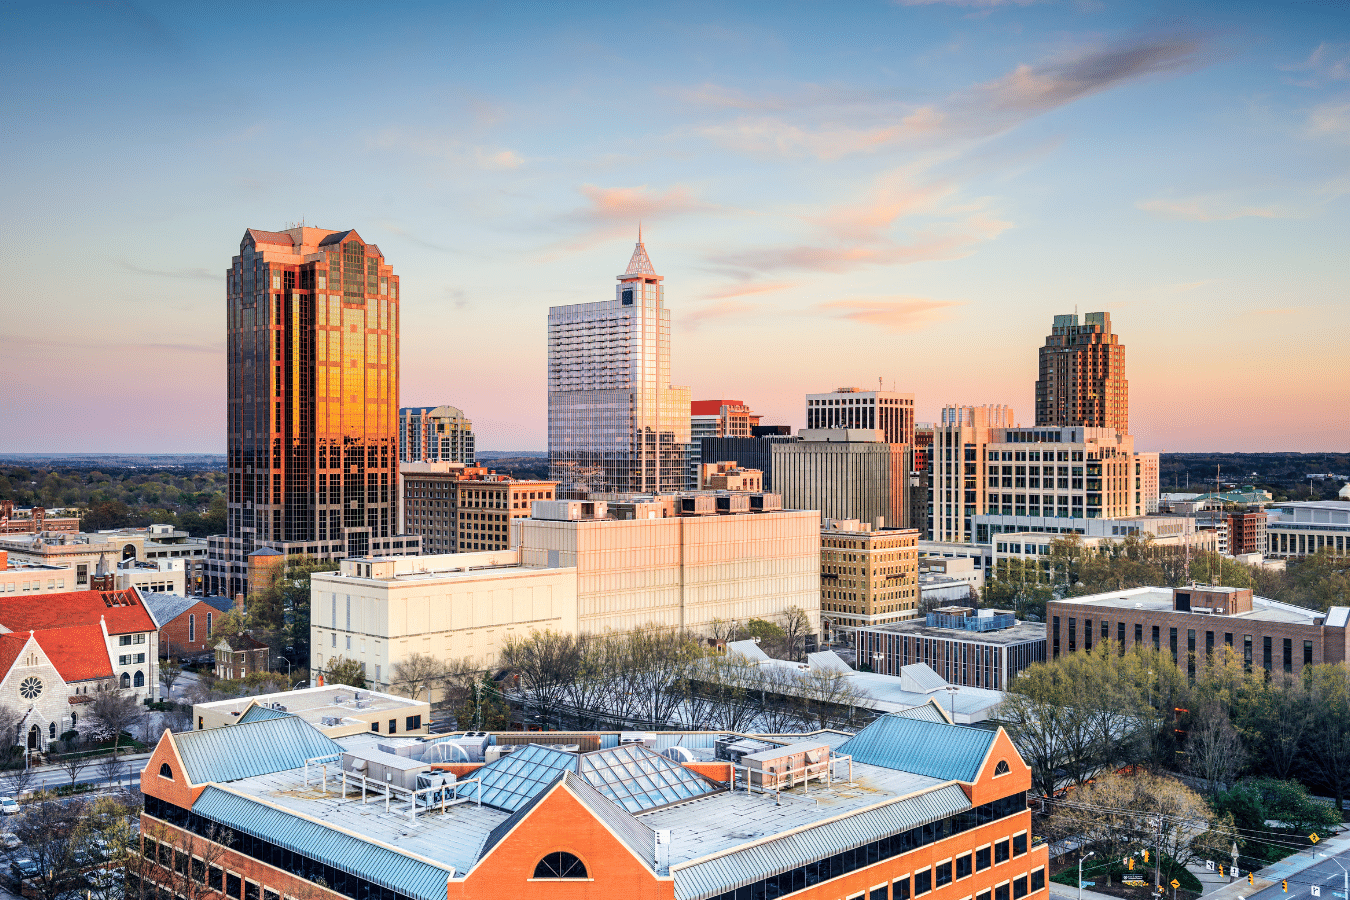 A photo of the city of Raleigh which is located next to Garner, NC